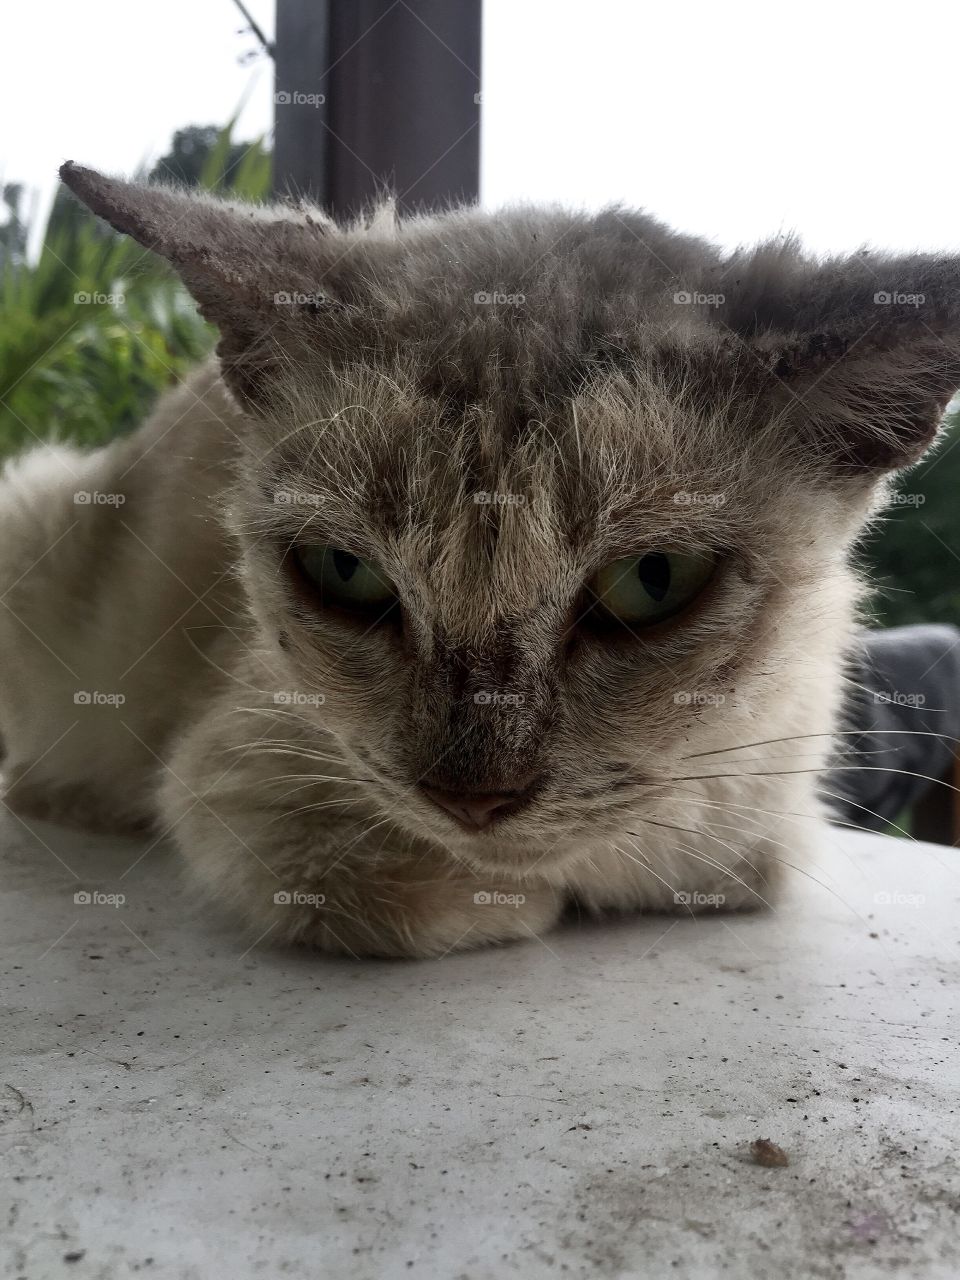 I found this cat from the street. I would like to take care of him, but I don't have enough money. If I can sell this picture he gonna have good house good food and good life ❤️ I love cats 